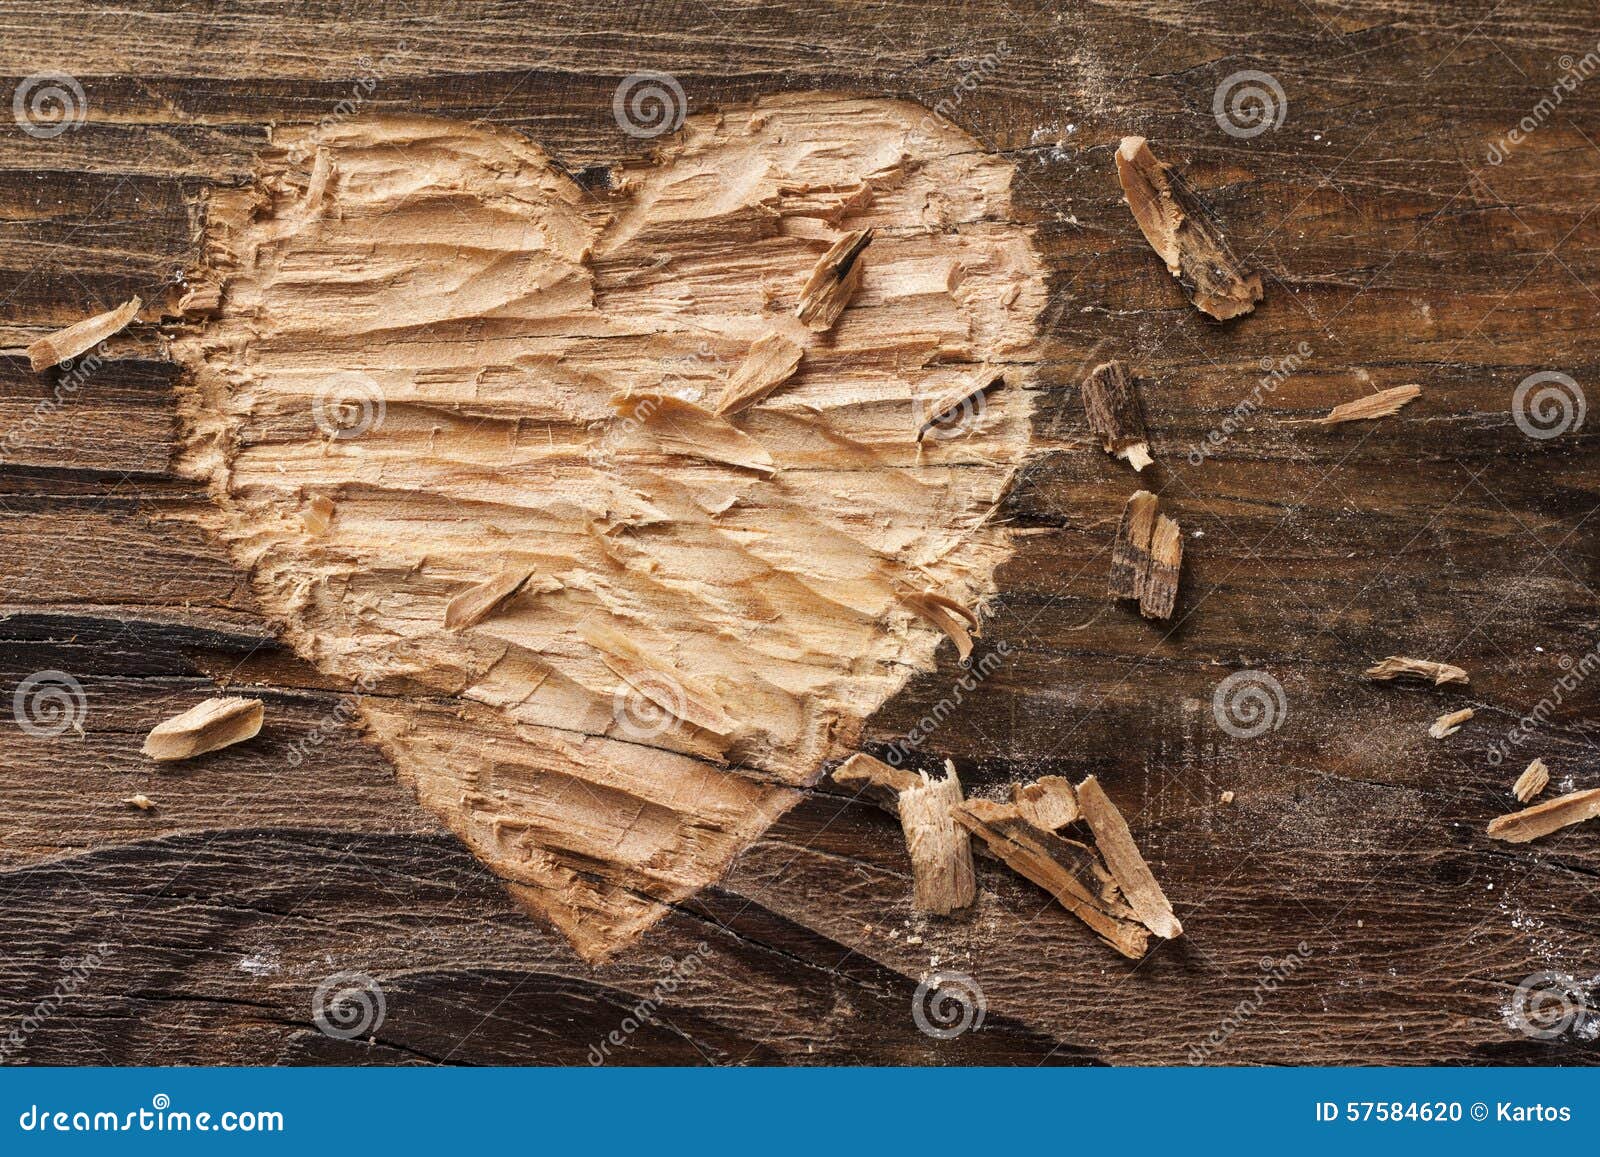 heart carved